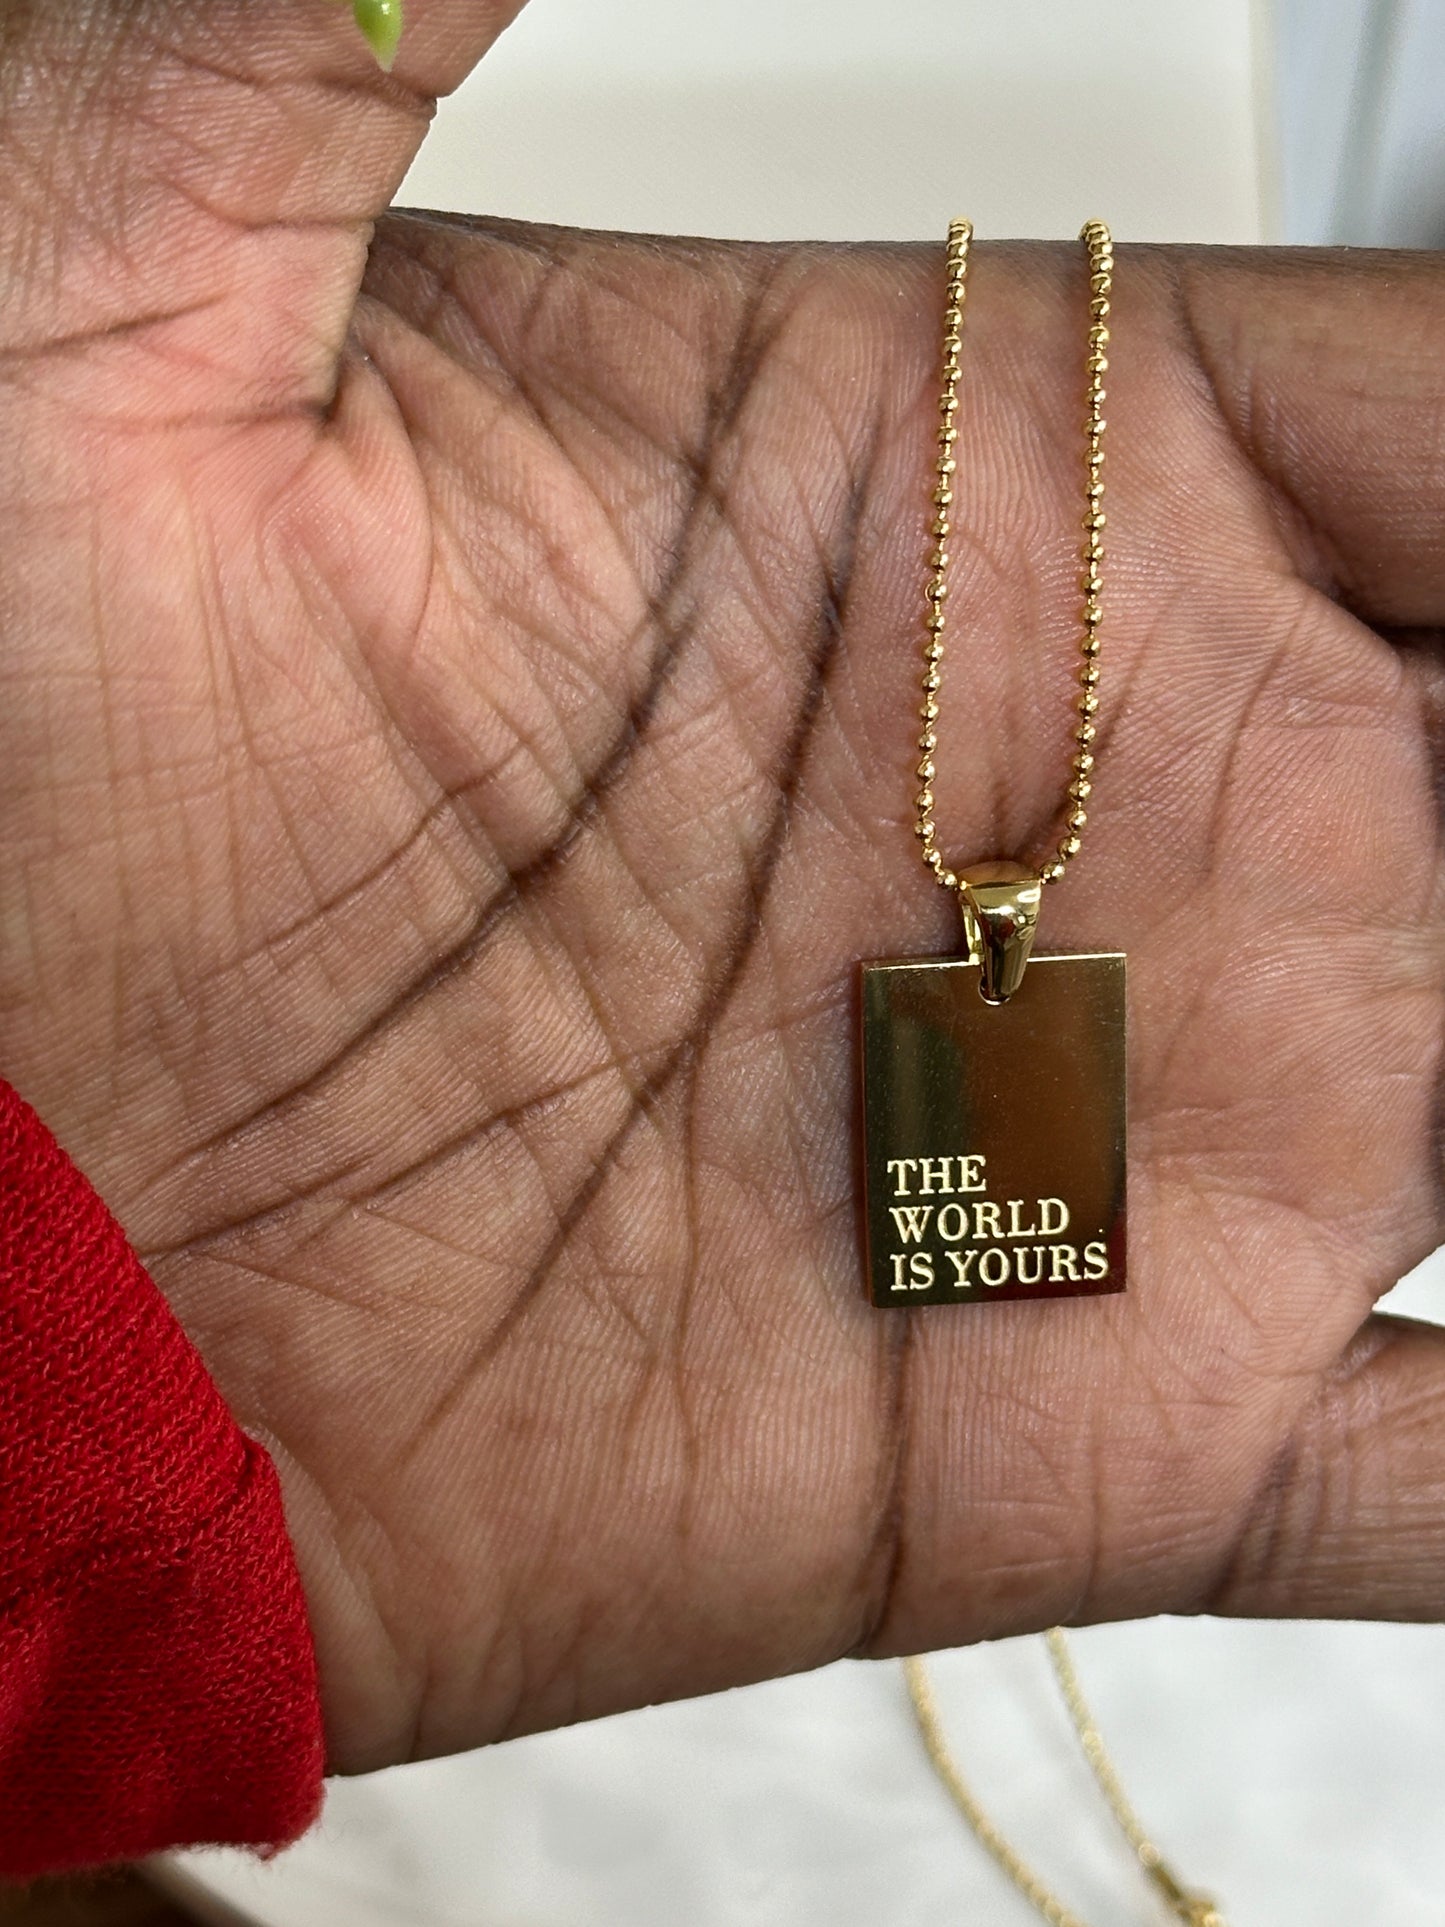 The Affirmation Necklace